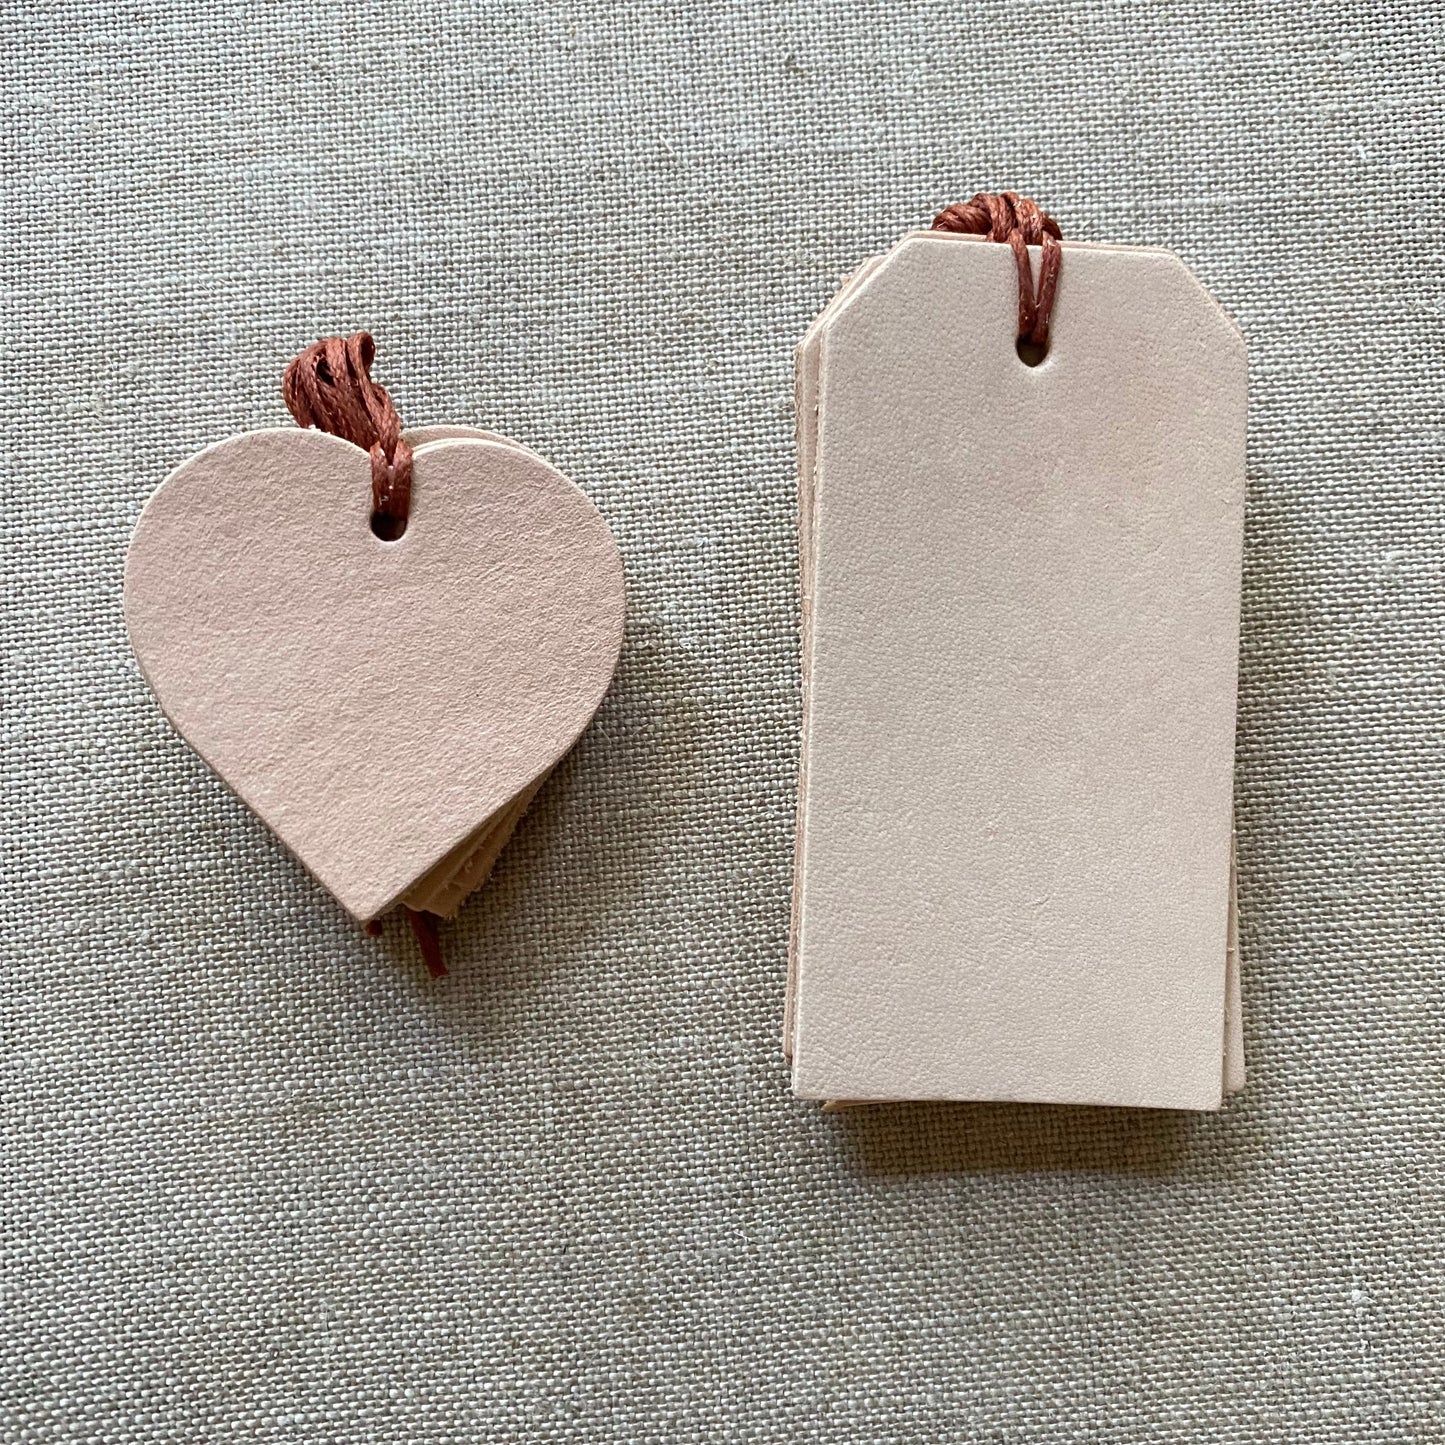 Leather Gift Tags for Birthdays, Seasonal, Travel, DIY Chaio Leather Goods 